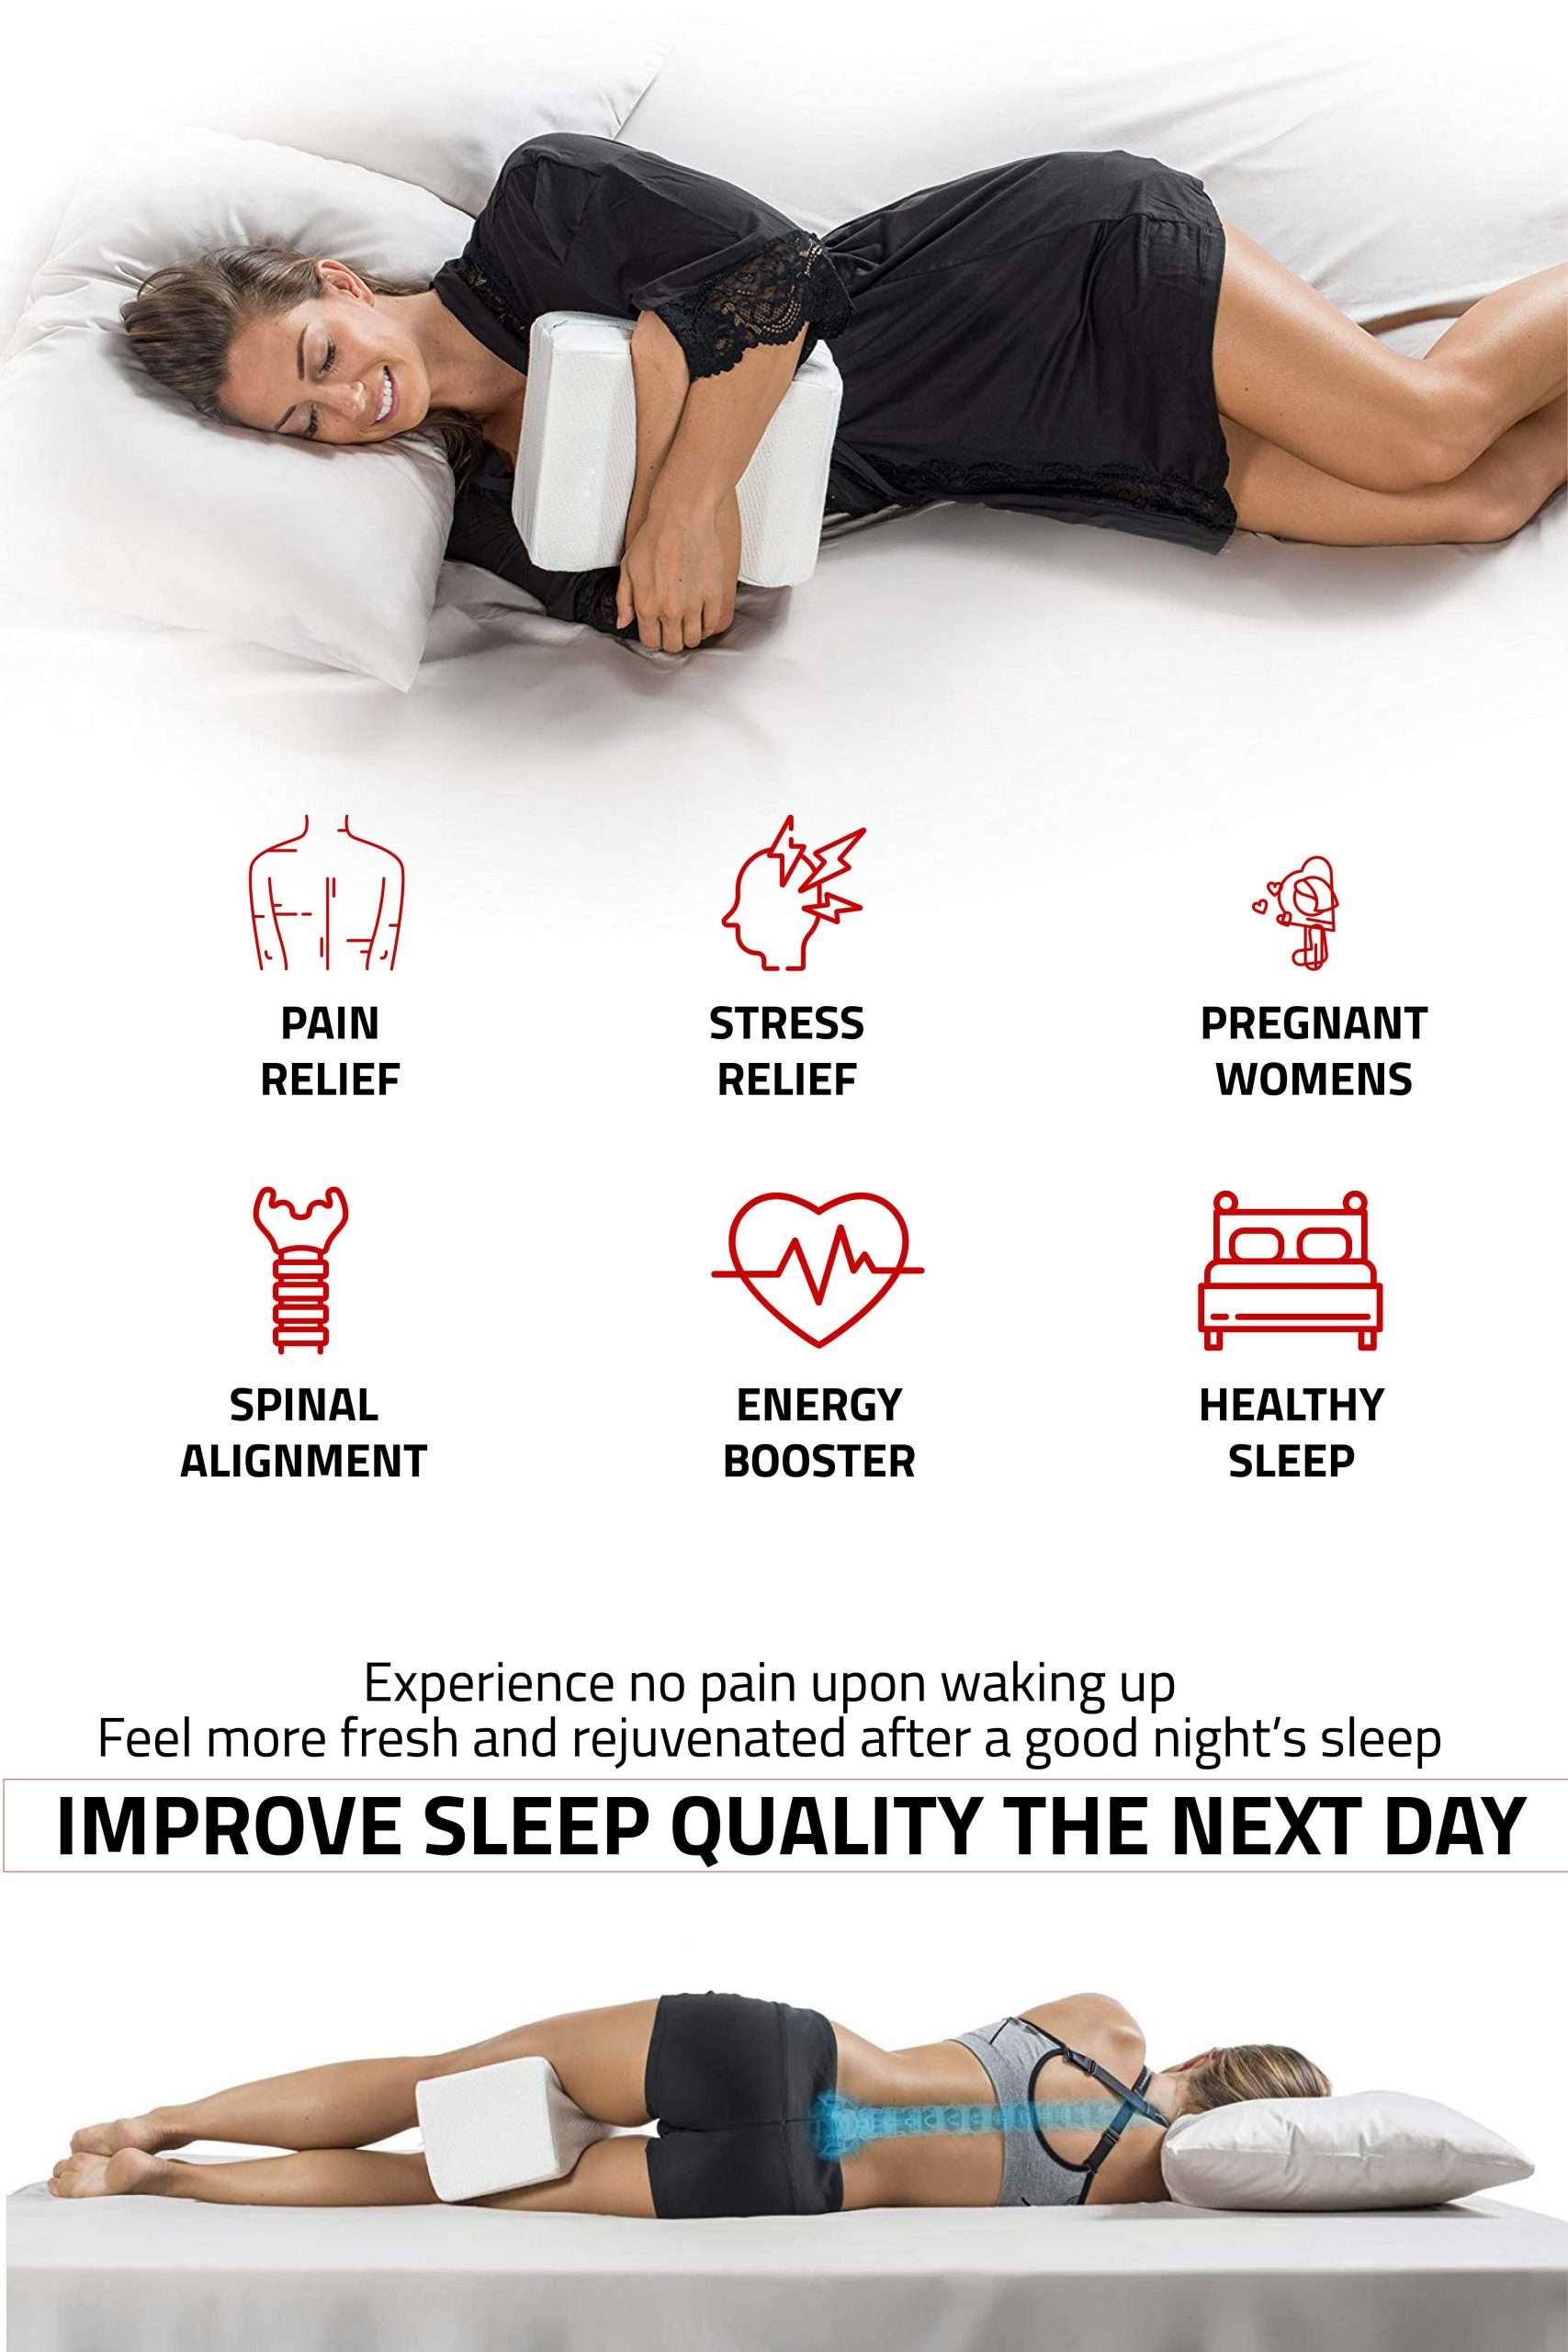 Pin on Leg pillow for back pain under knees better sleep experience